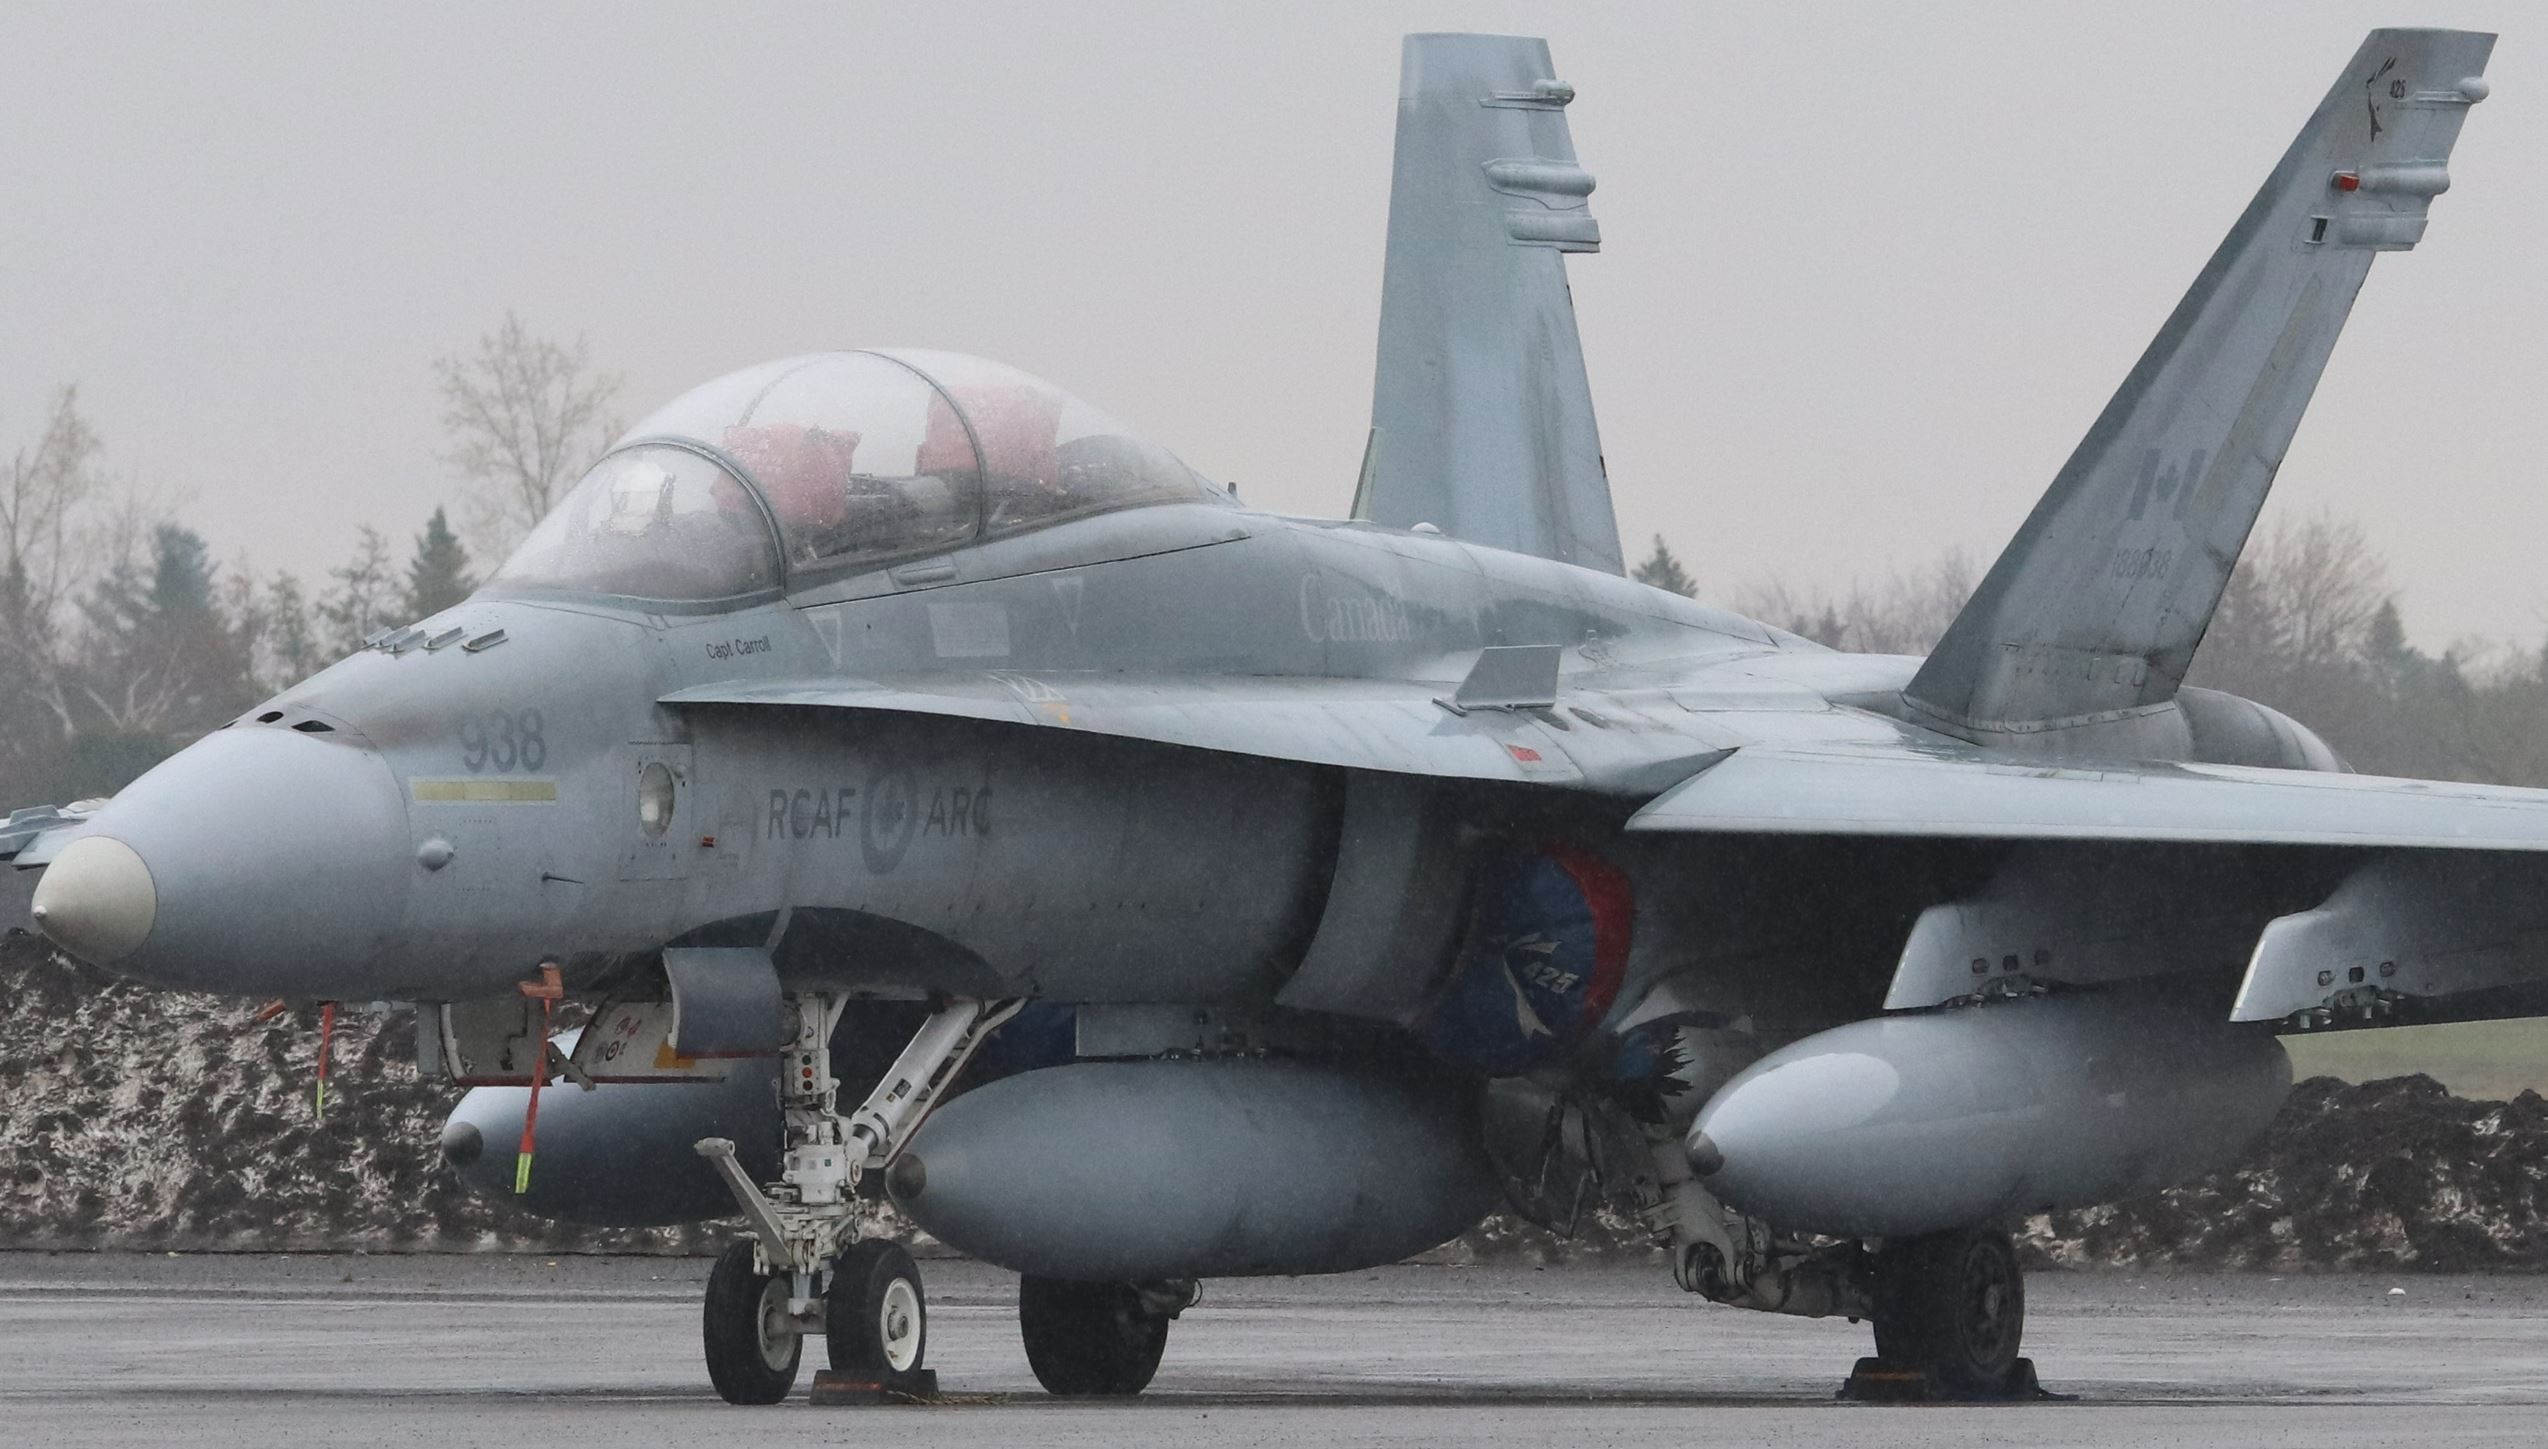 McDonnell Douglas FA-18 Hornet (18-8938) - Royal Canadian Air Force CF-188B “Hornet” 188938 of 425e Escadron d'appui tactique “Les Alouettes” from 3 Wing, Canadian Forces Base Bagotville at a drizzly YOW on 26 Apr 23.  425 Squadron was Canada’s first French Canadian Squadron and is the proud source of the name for the Montréal Alouettes of the Canadian Football League.  